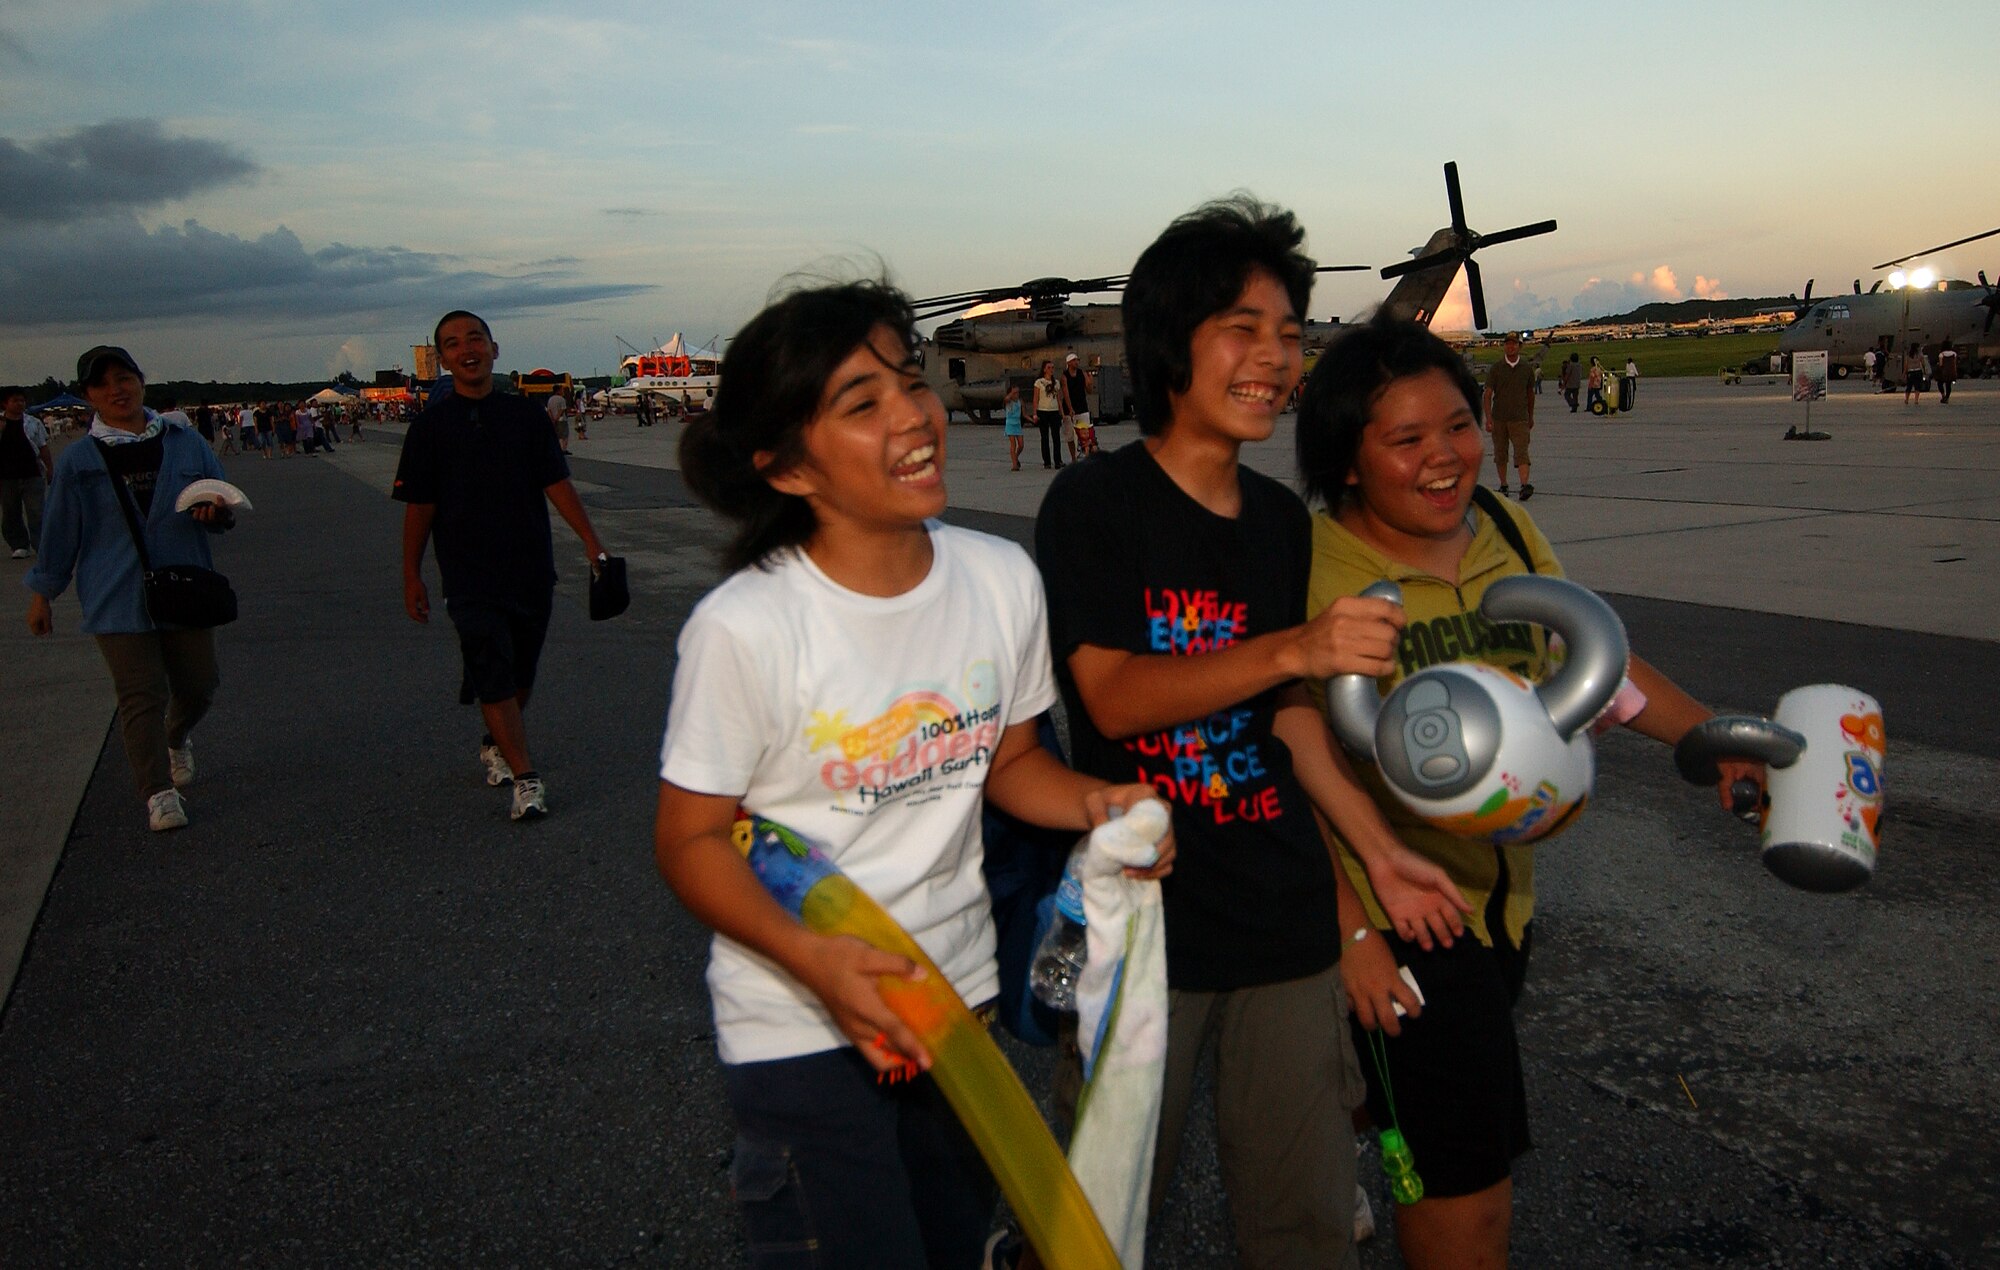 A few young local nationals sing songs as they depart from Kadena Air Base’s AmericaFest open house July 5, 2008.  AmericaFest featured two dozen aircraft static displays, live entertainment, activities for children and a nightly fireworks show. The two-day event, which was designed to strengthen relations with the base's Okinawan neighbors, drew nearly 66,000 people.
(U.S. Air Force photo/Tech. Sgt. Rey Ramon)